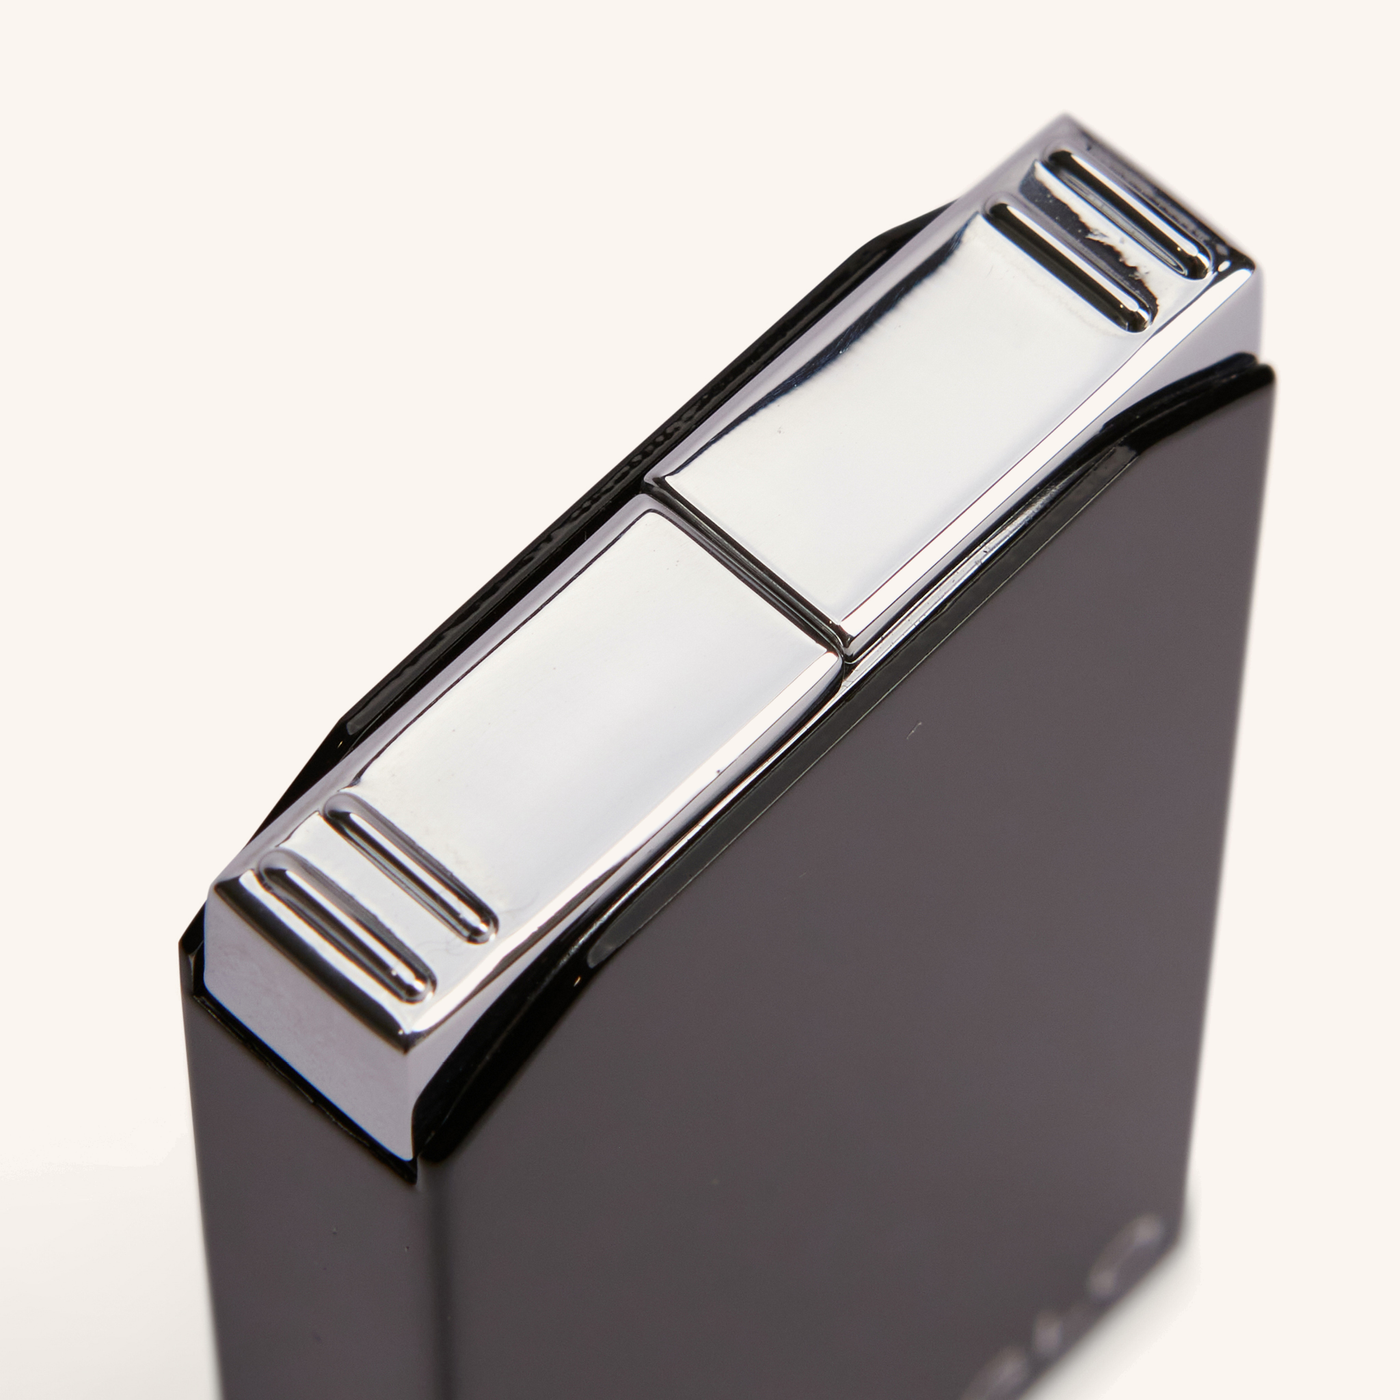 Siglo Twin Flame Lighter Black